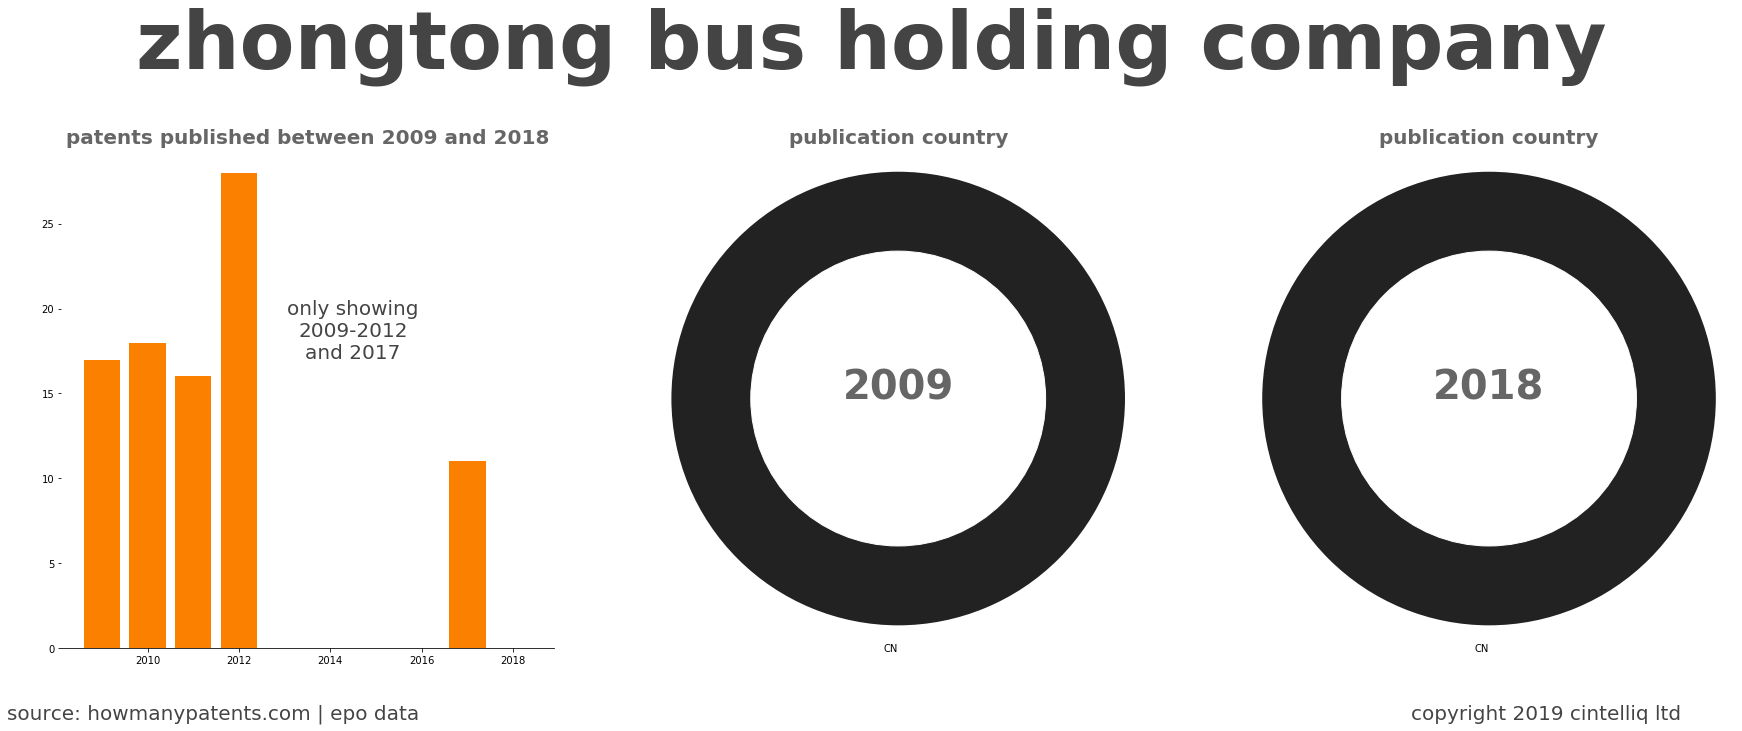 summary of patents for Zhongtong Bus Holding Company